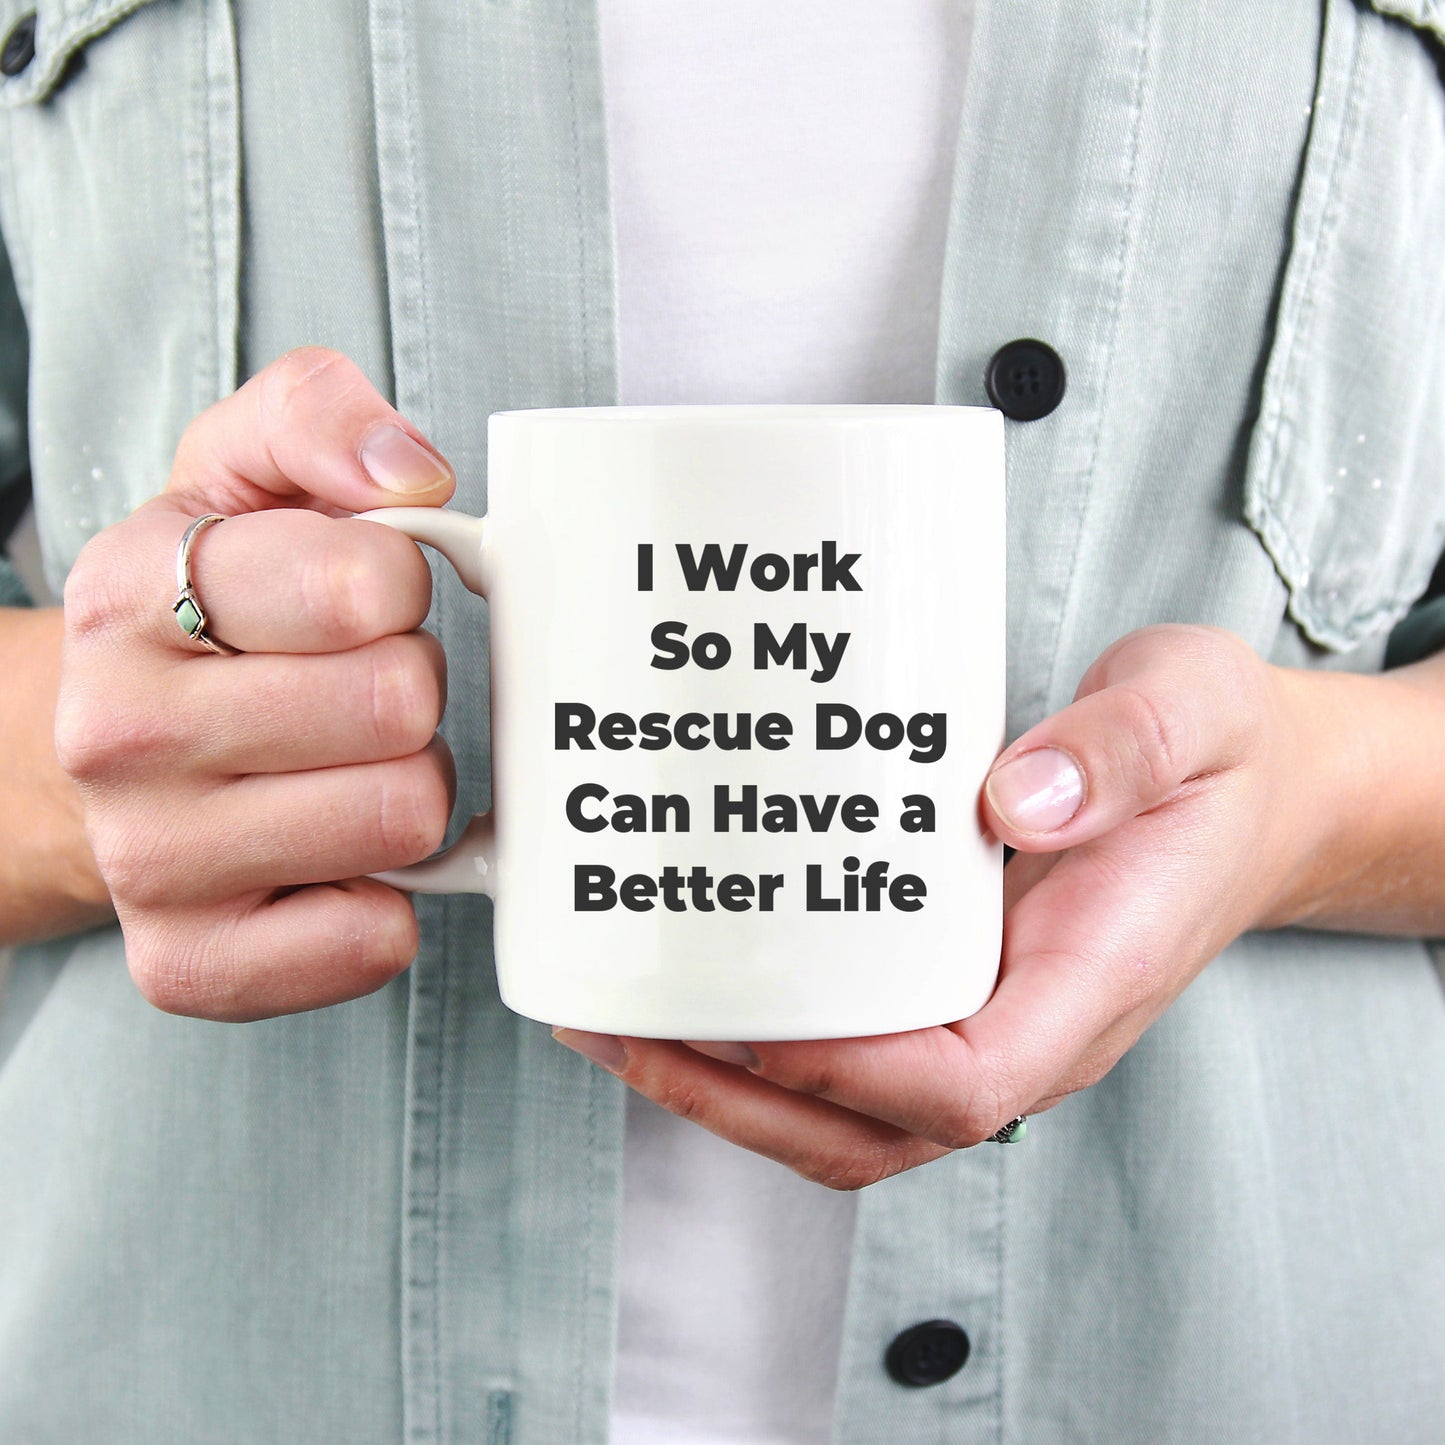 Rescue Dog Coffee Mug I Work So My Dog Can Have a Better LIfe Funny Gift